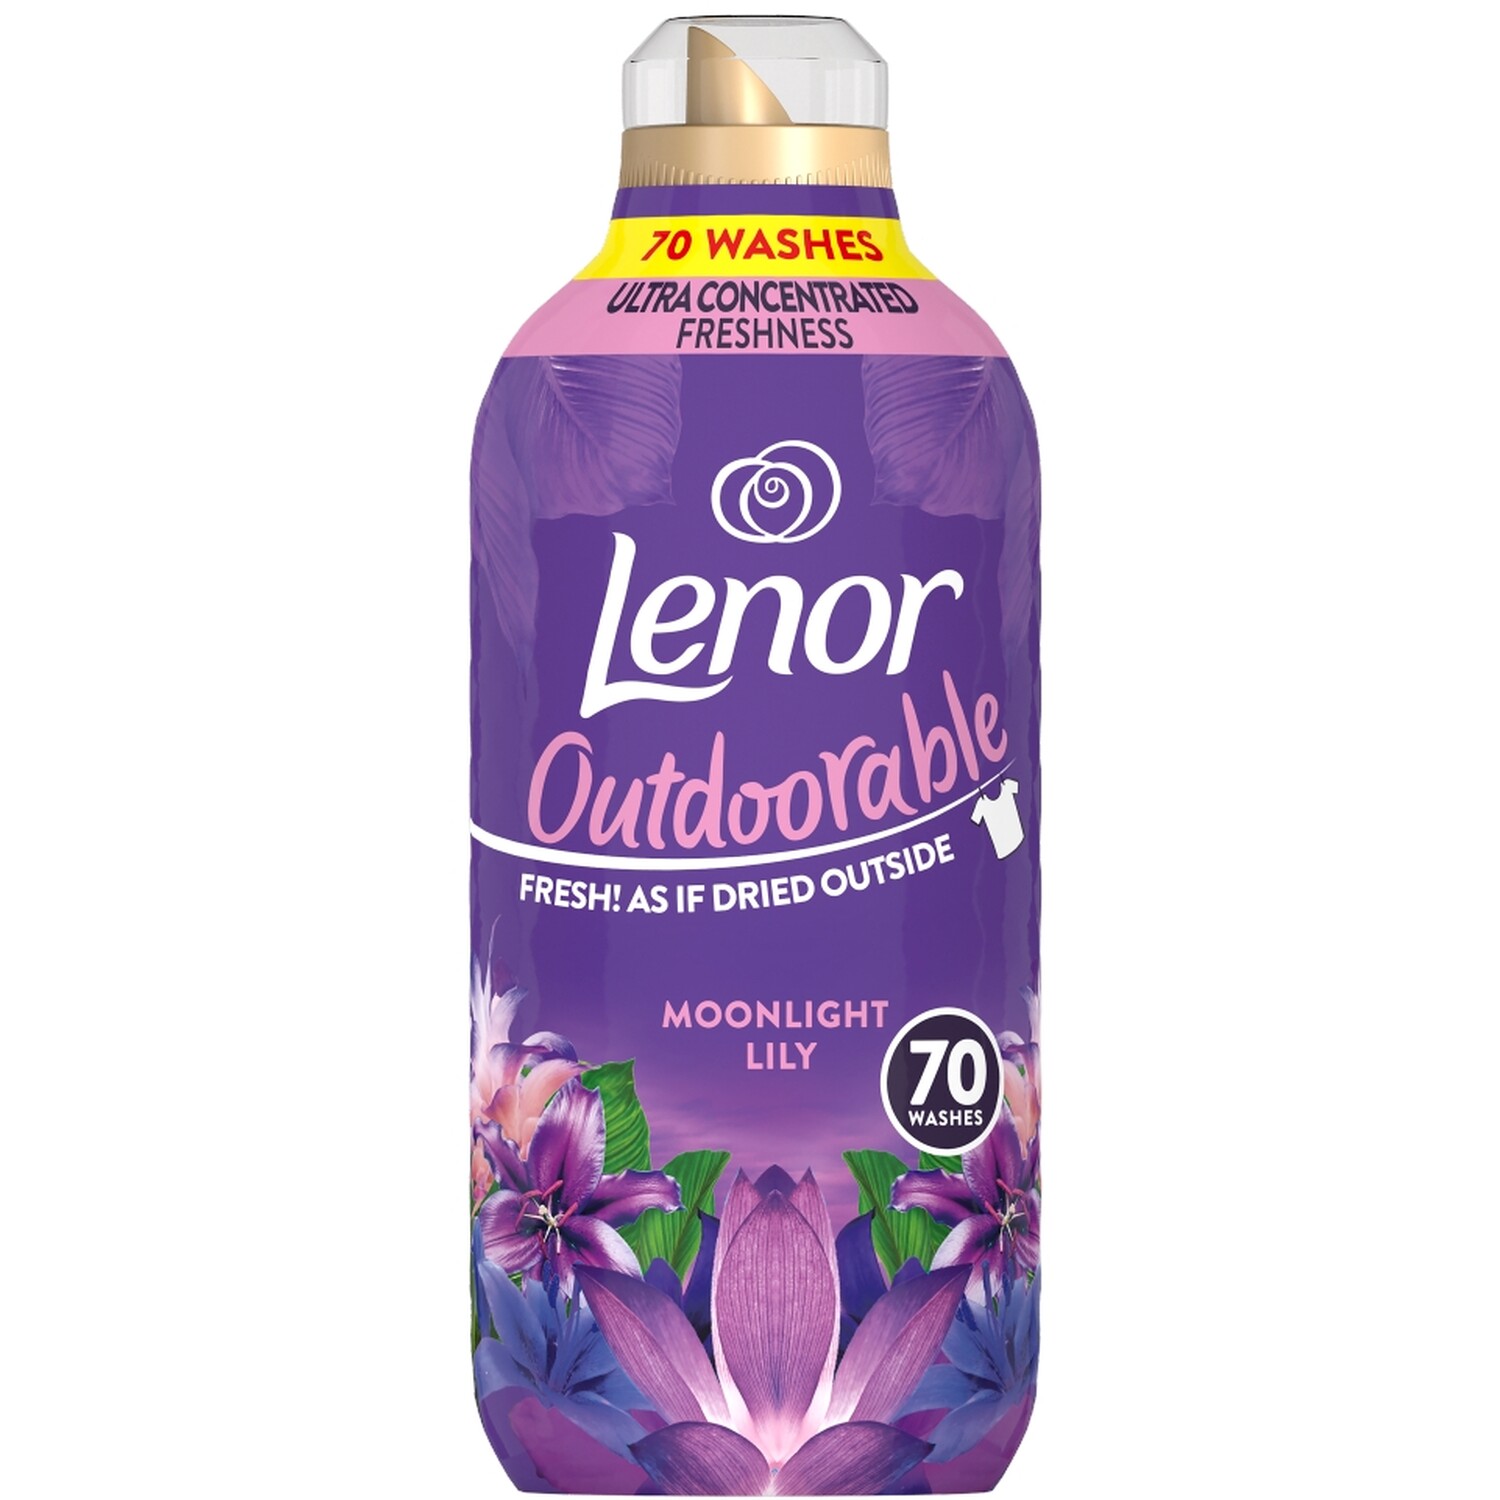 Lenor Outdoorable Fabric Conditioner - 70 / Moonlight Lily Image